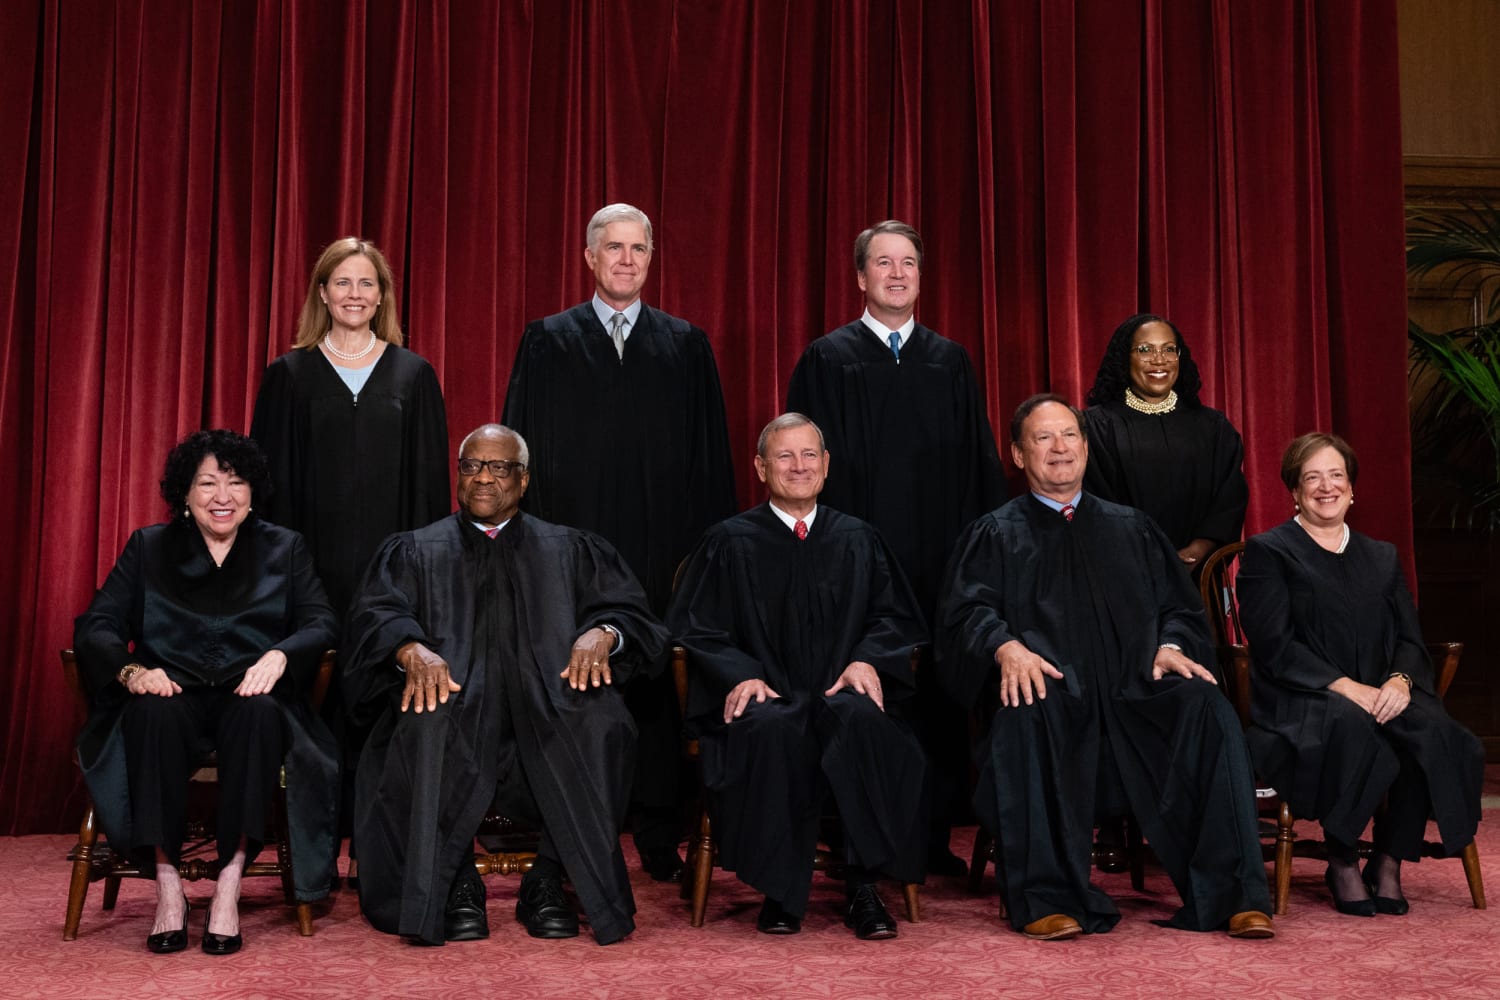 The Supreme Court begins its new term October 2. Here are the cases to  watch. - Vox